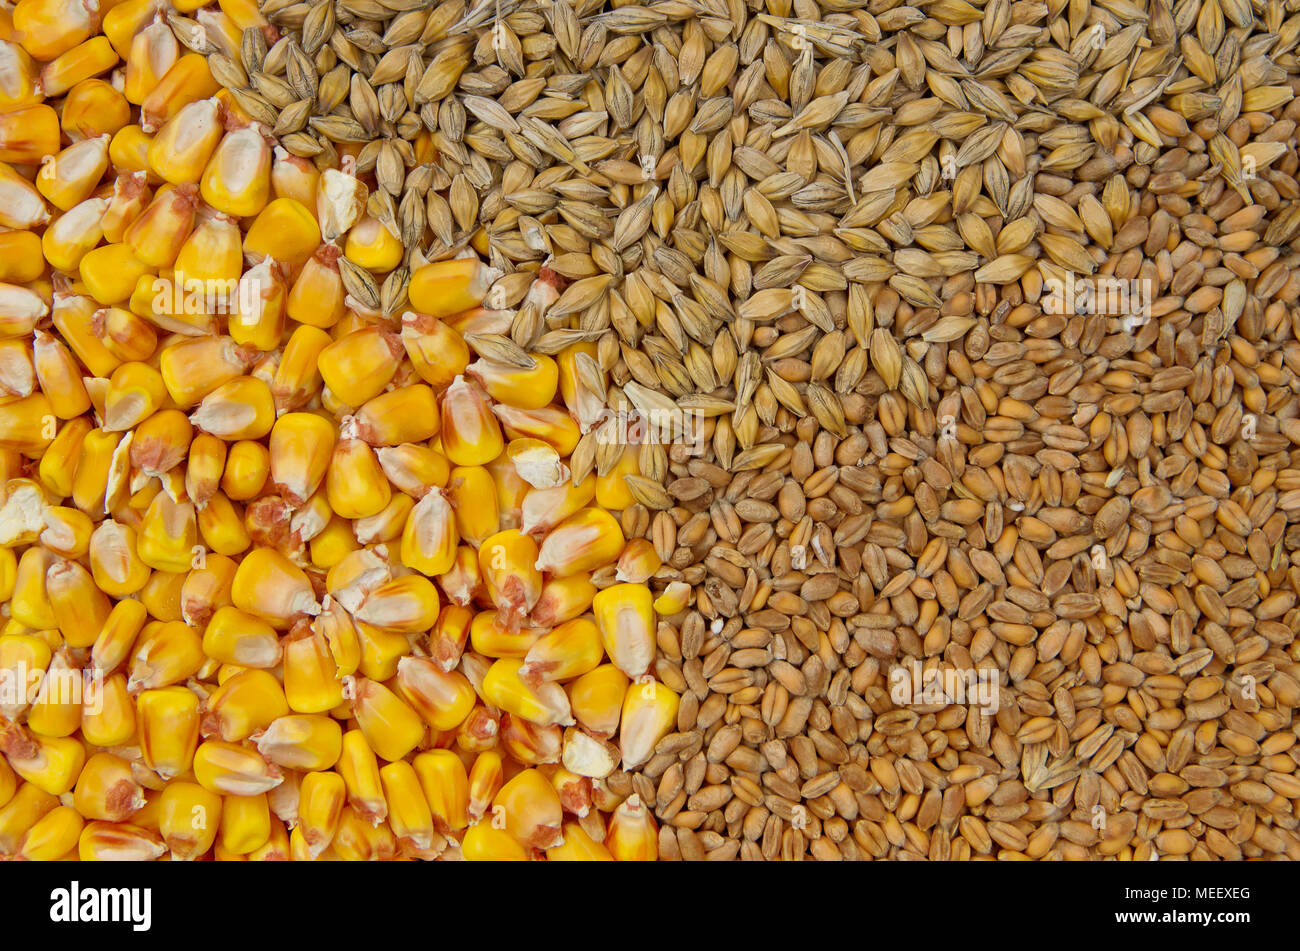 Cereals - wheat, barley and maize Stock Photo